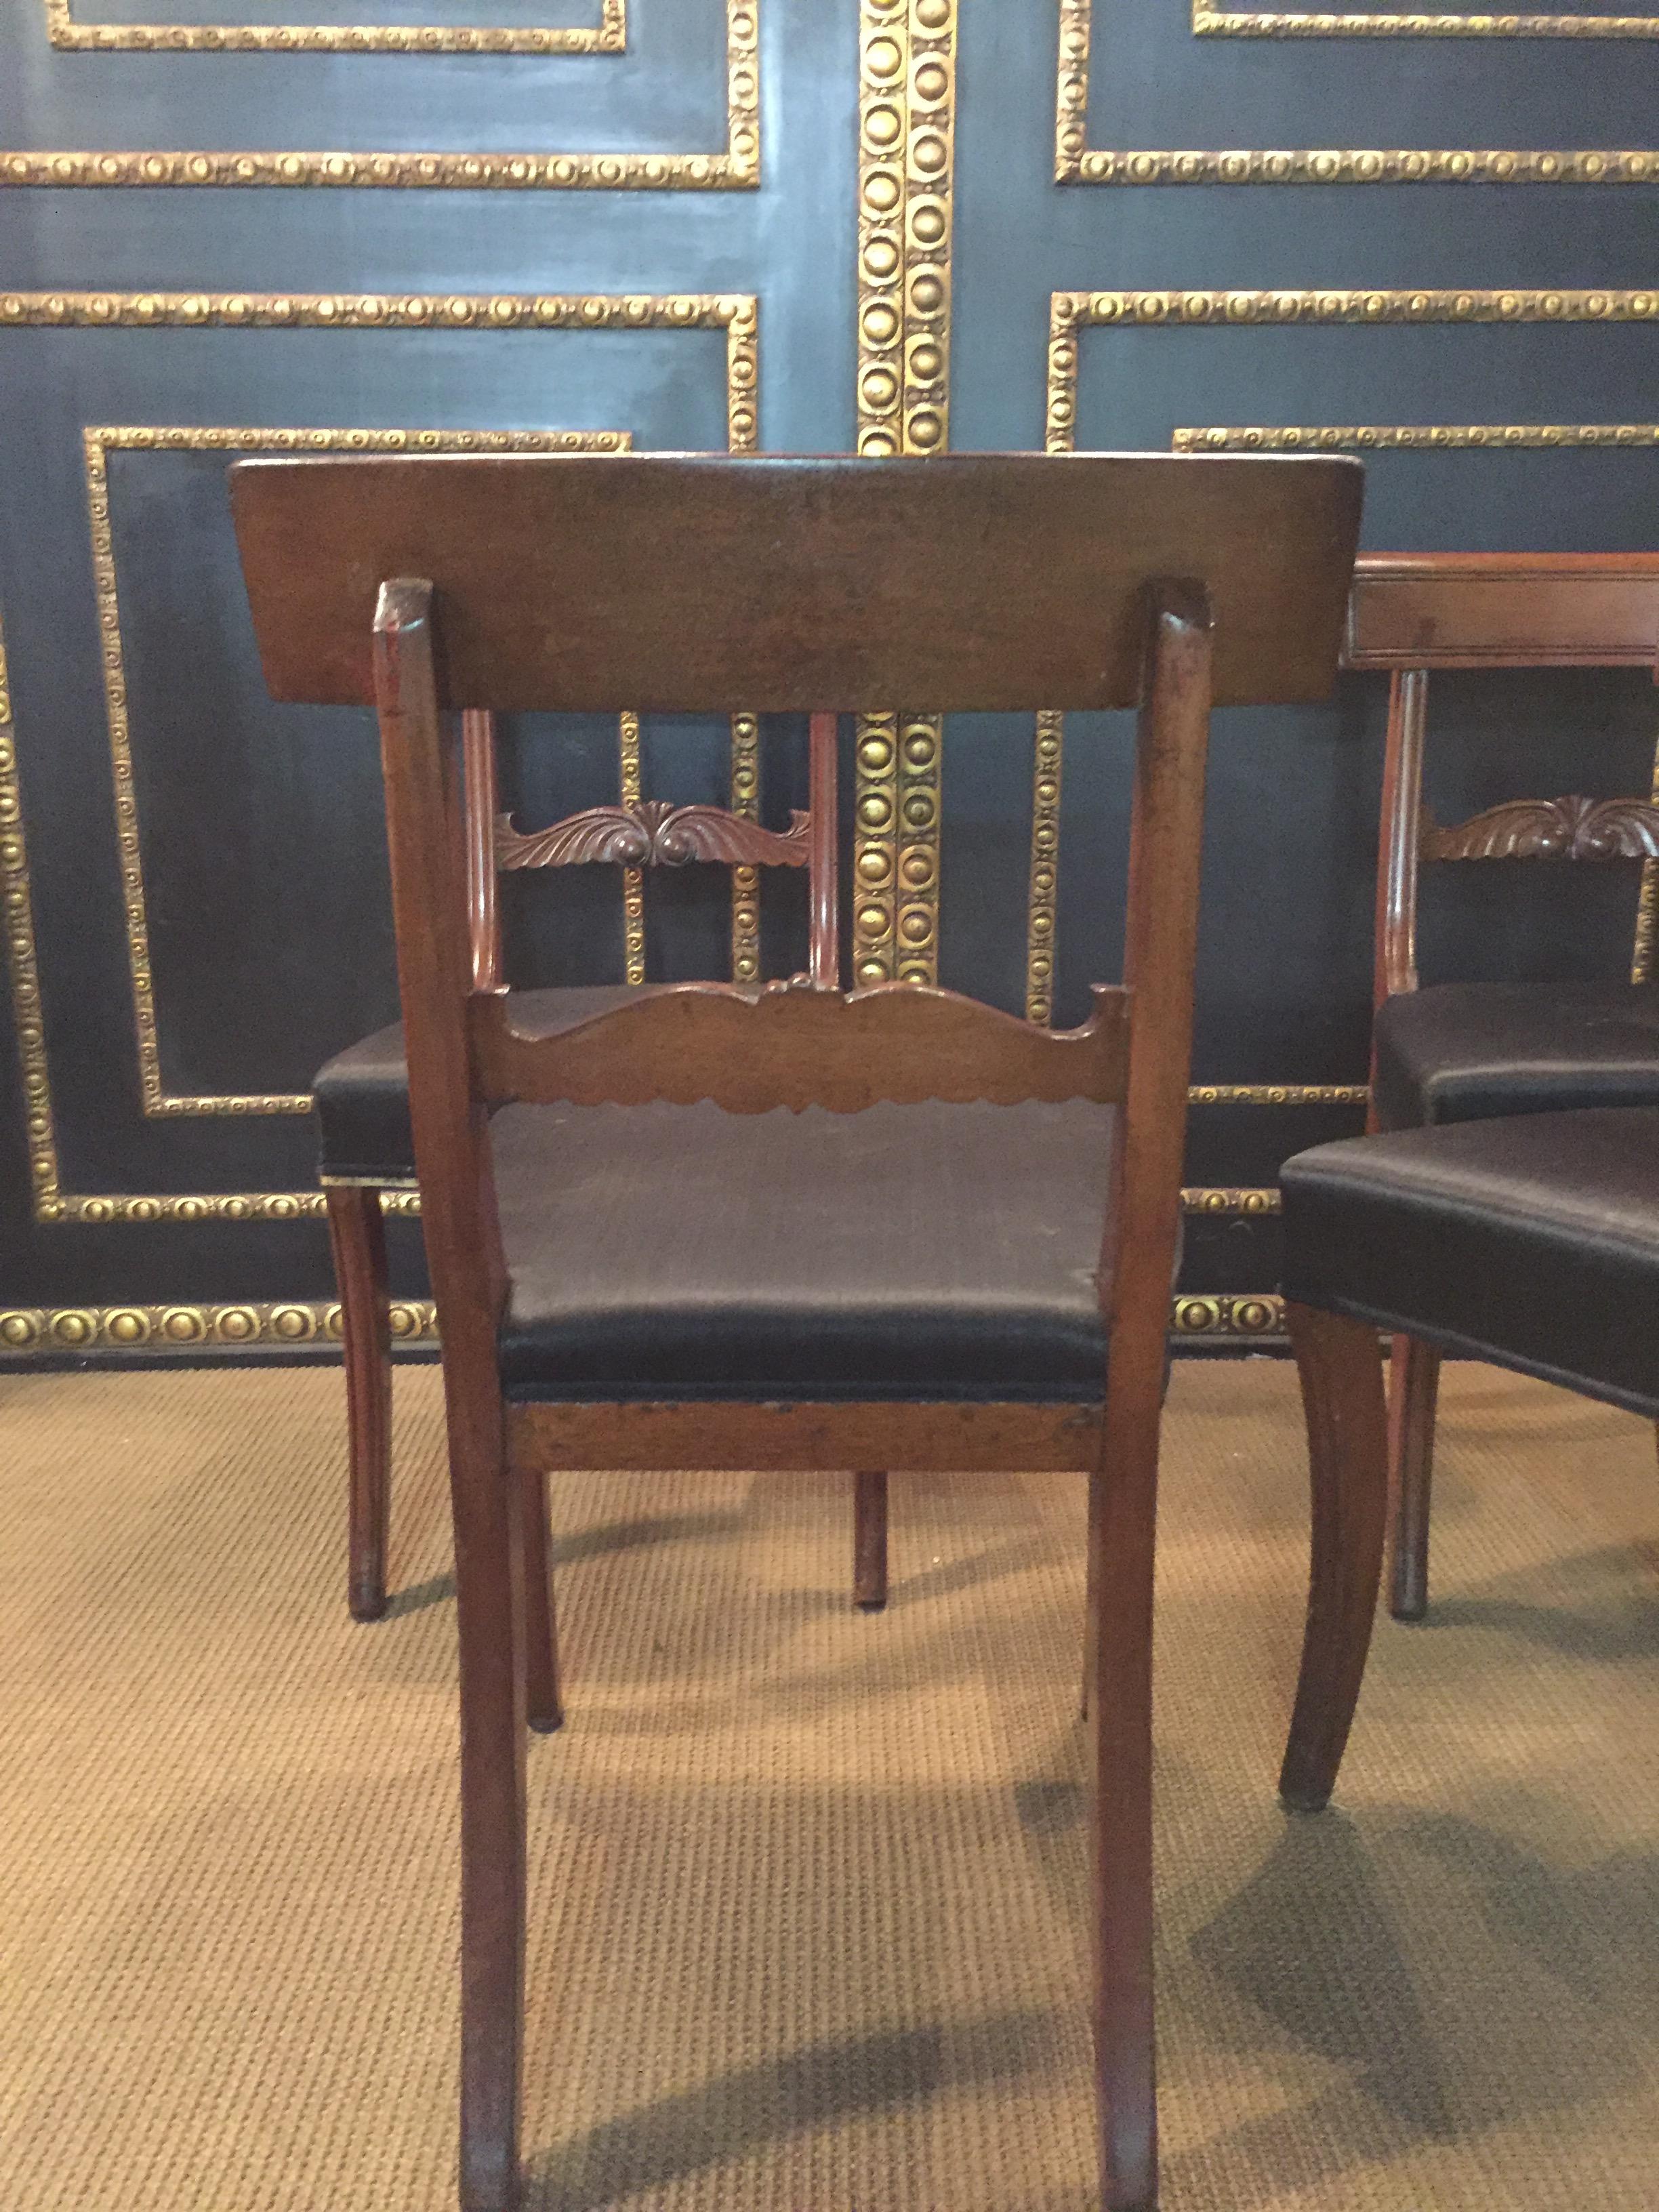 19th Century 4 Biedermeier Saber-Legs Chairs Are Solid Mahogany 5